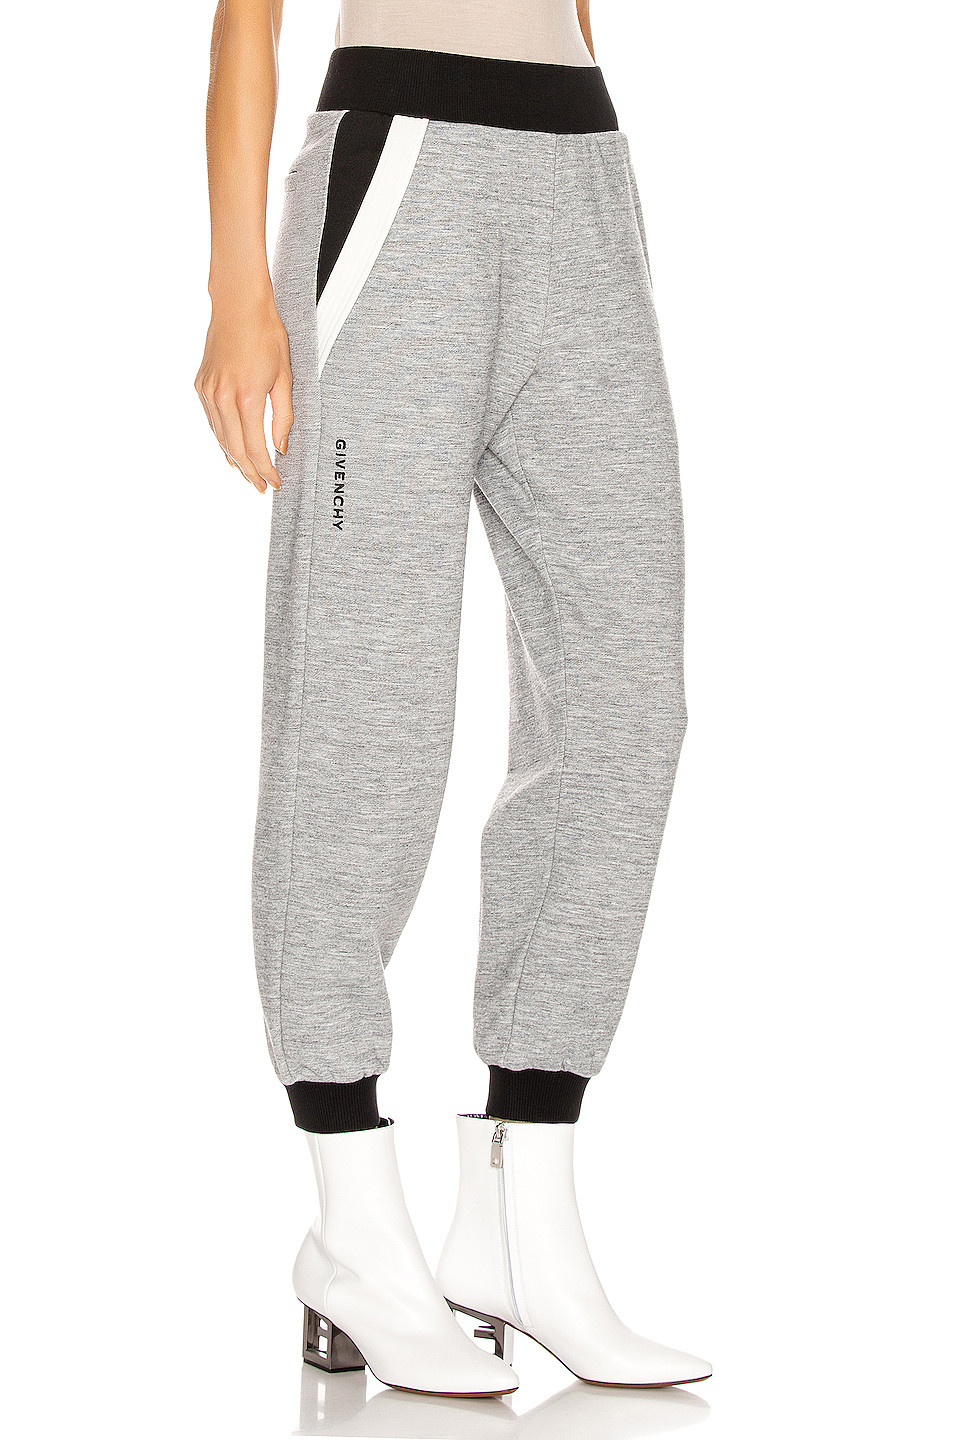 Givenchy Cropped Jogger Pant in Grey